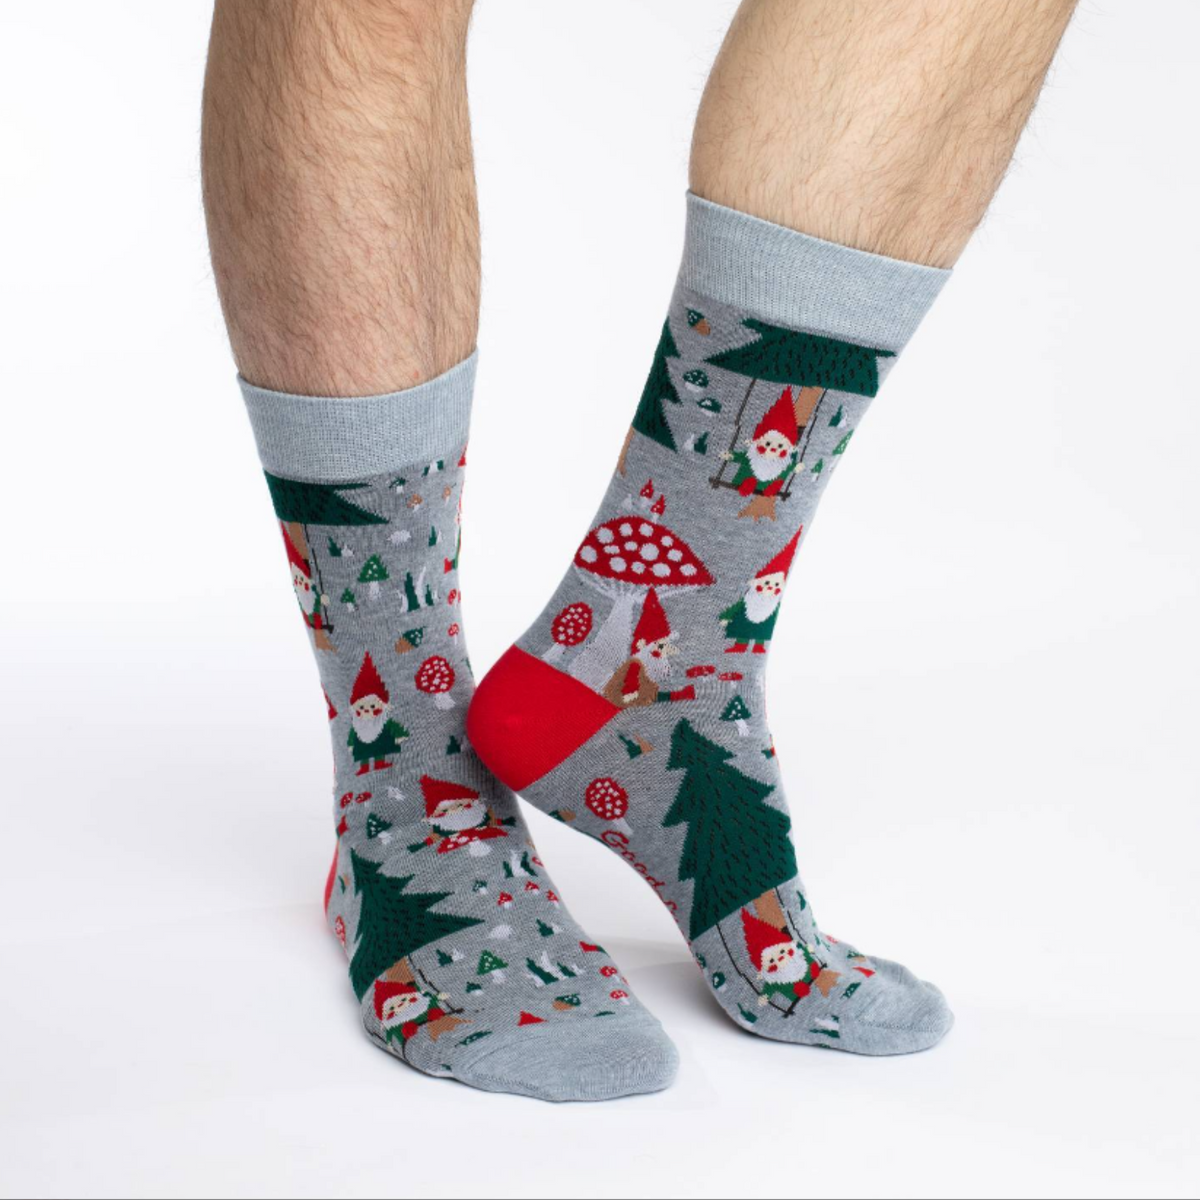 Good Luck Sock Woodland Gnomes women&#39;s and men&#39;s crew socks featuring gray sock with gnomes in red hats, mushrooms, and trees all over. Socks worn by male model. 